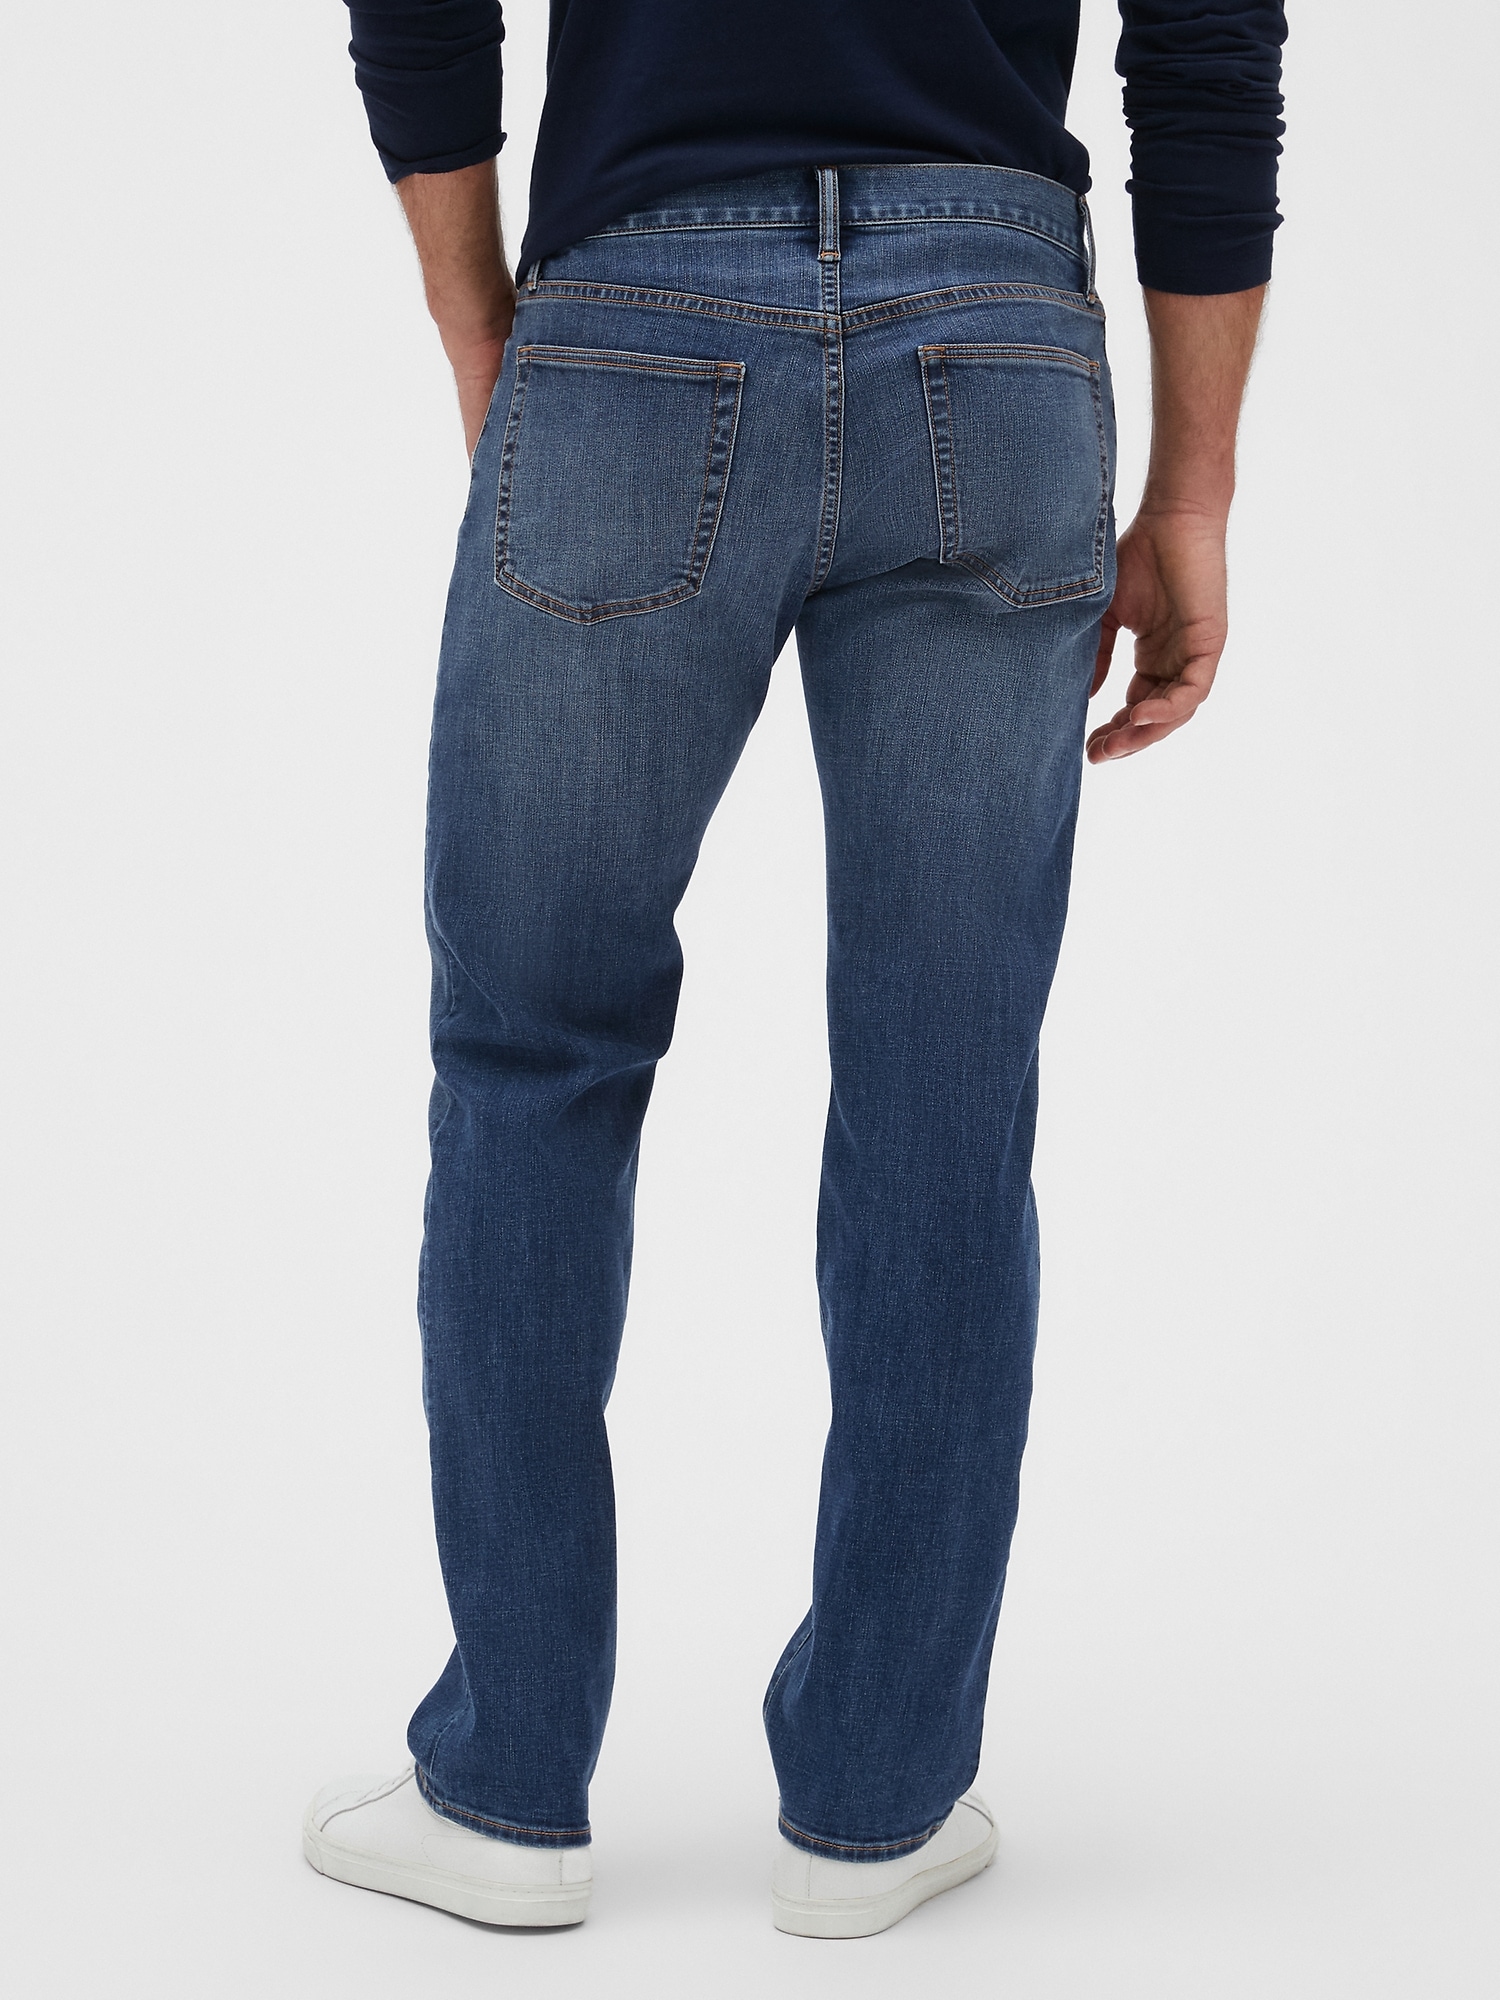 GapFlex Soft Wear Straight Fit Jeans with Washwell | Gap Factory